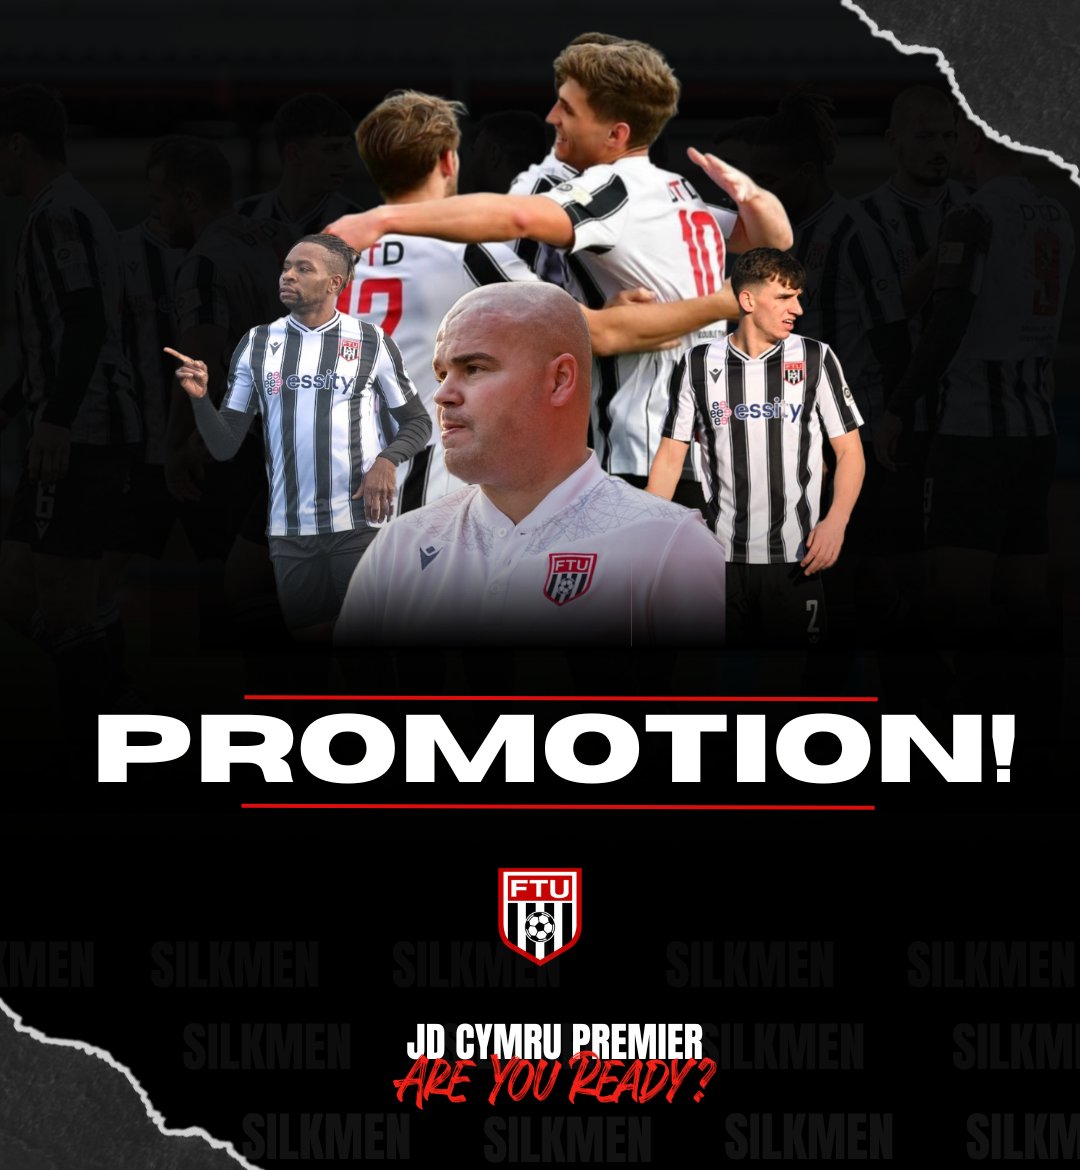 We're heading back into the Cymru Premier League, and if your business or company would like to join us on our journey we'd be delighted to have you on board. Email flinttownfc@gmail.com to find out more about our sponsorship packages & commercial partnerships ⚪⚫